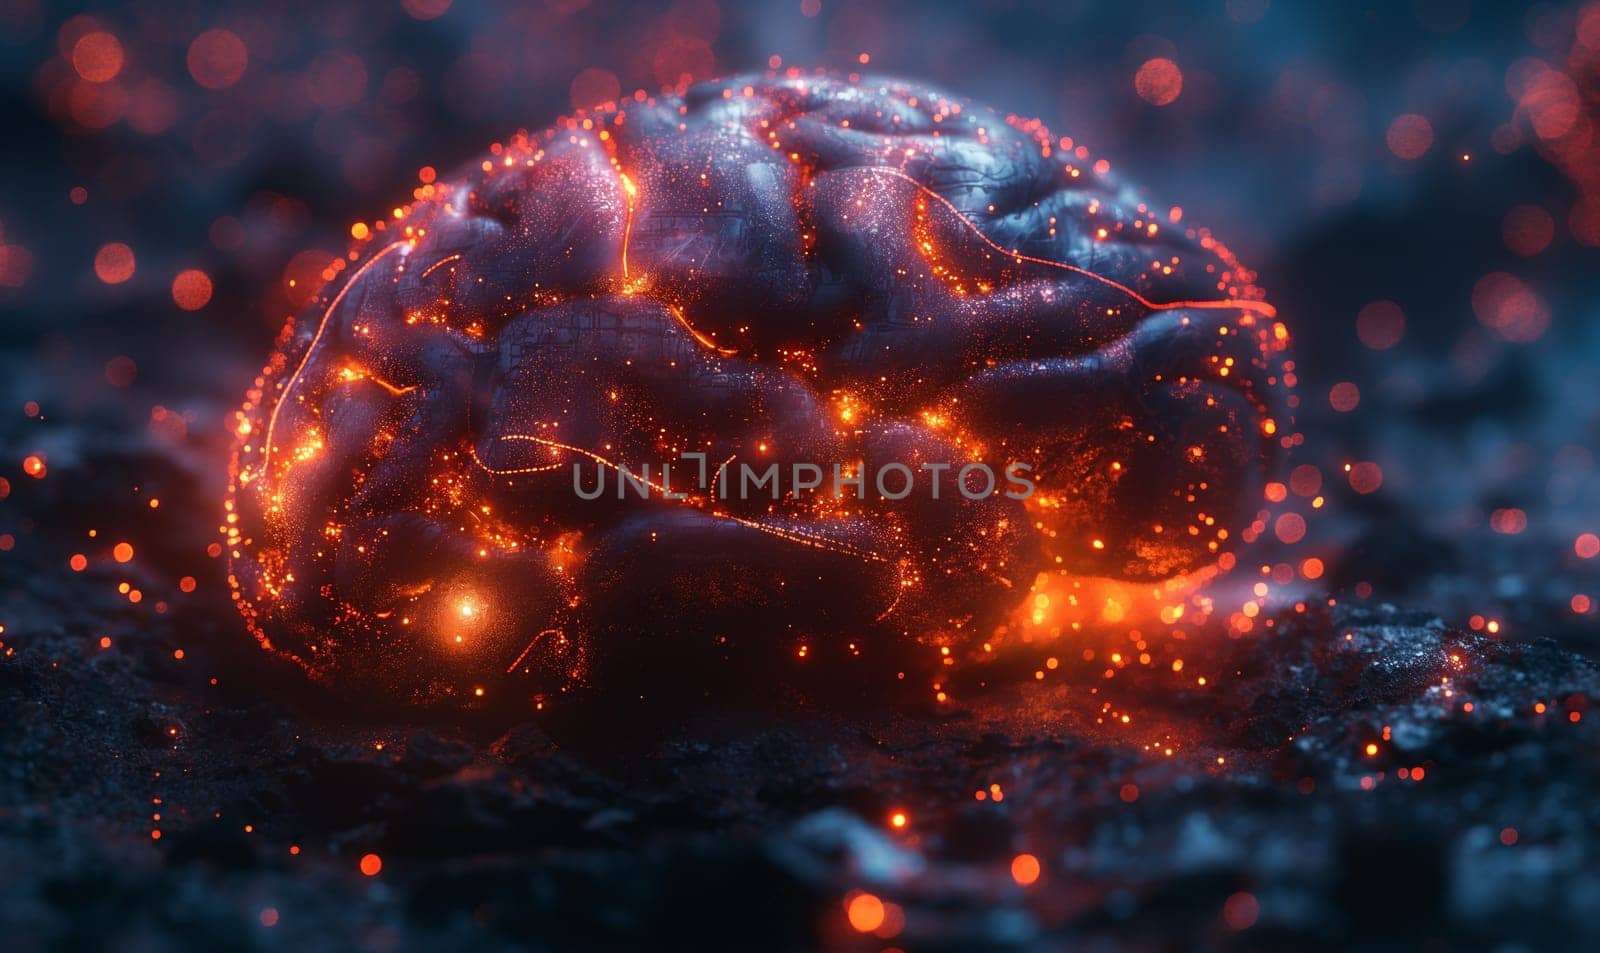 Detailed view of a brain resting on a wet surface.